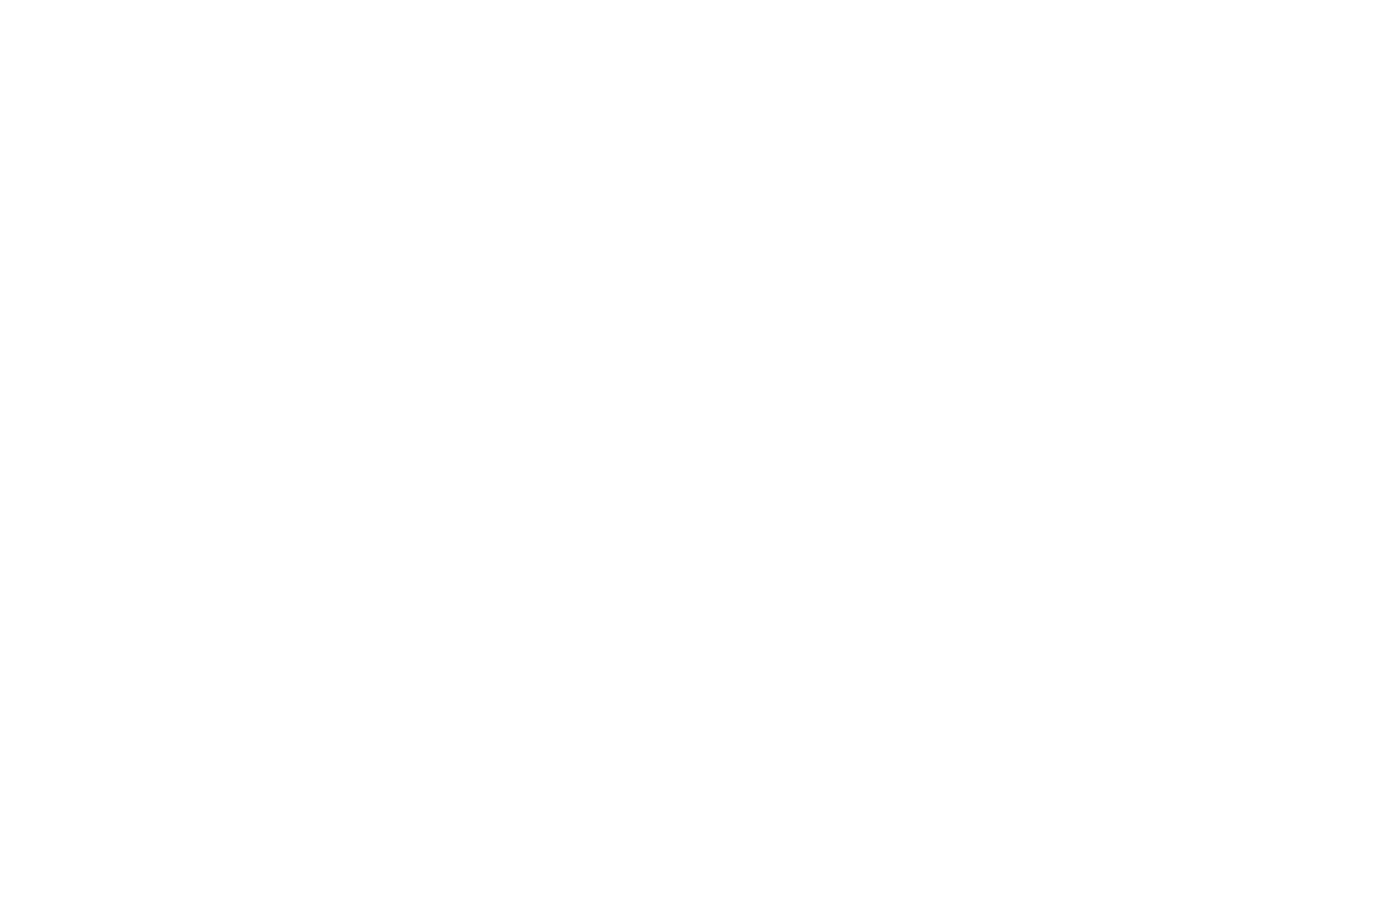 CA Logos_Oatly WHITE.png